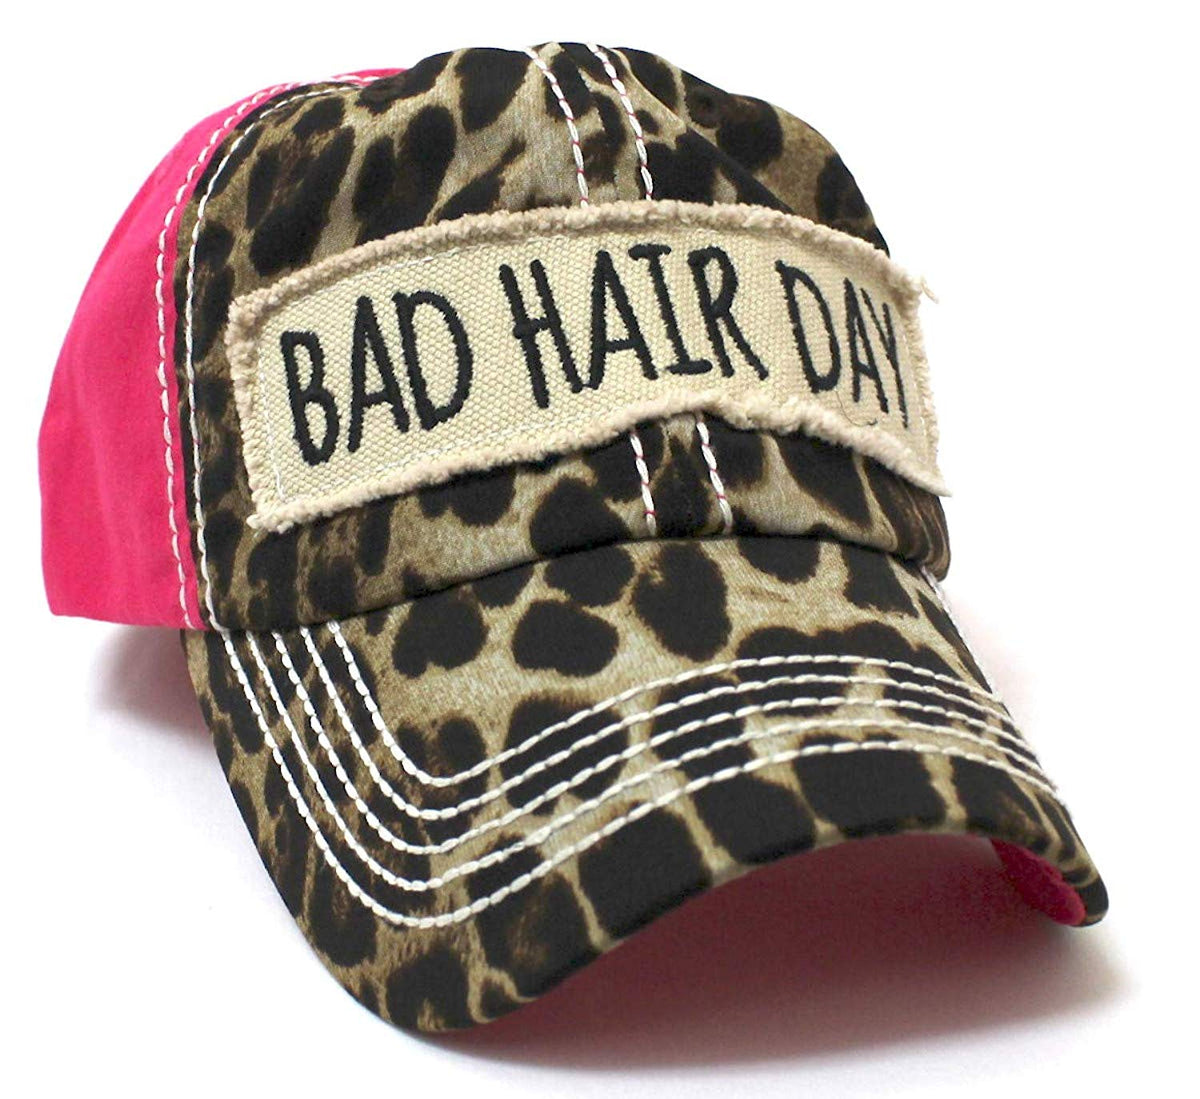 NEW!! Leopard/Pink"BAD HAIR DAY" Patch Embroidery Hat - Caps 'N Vintage 